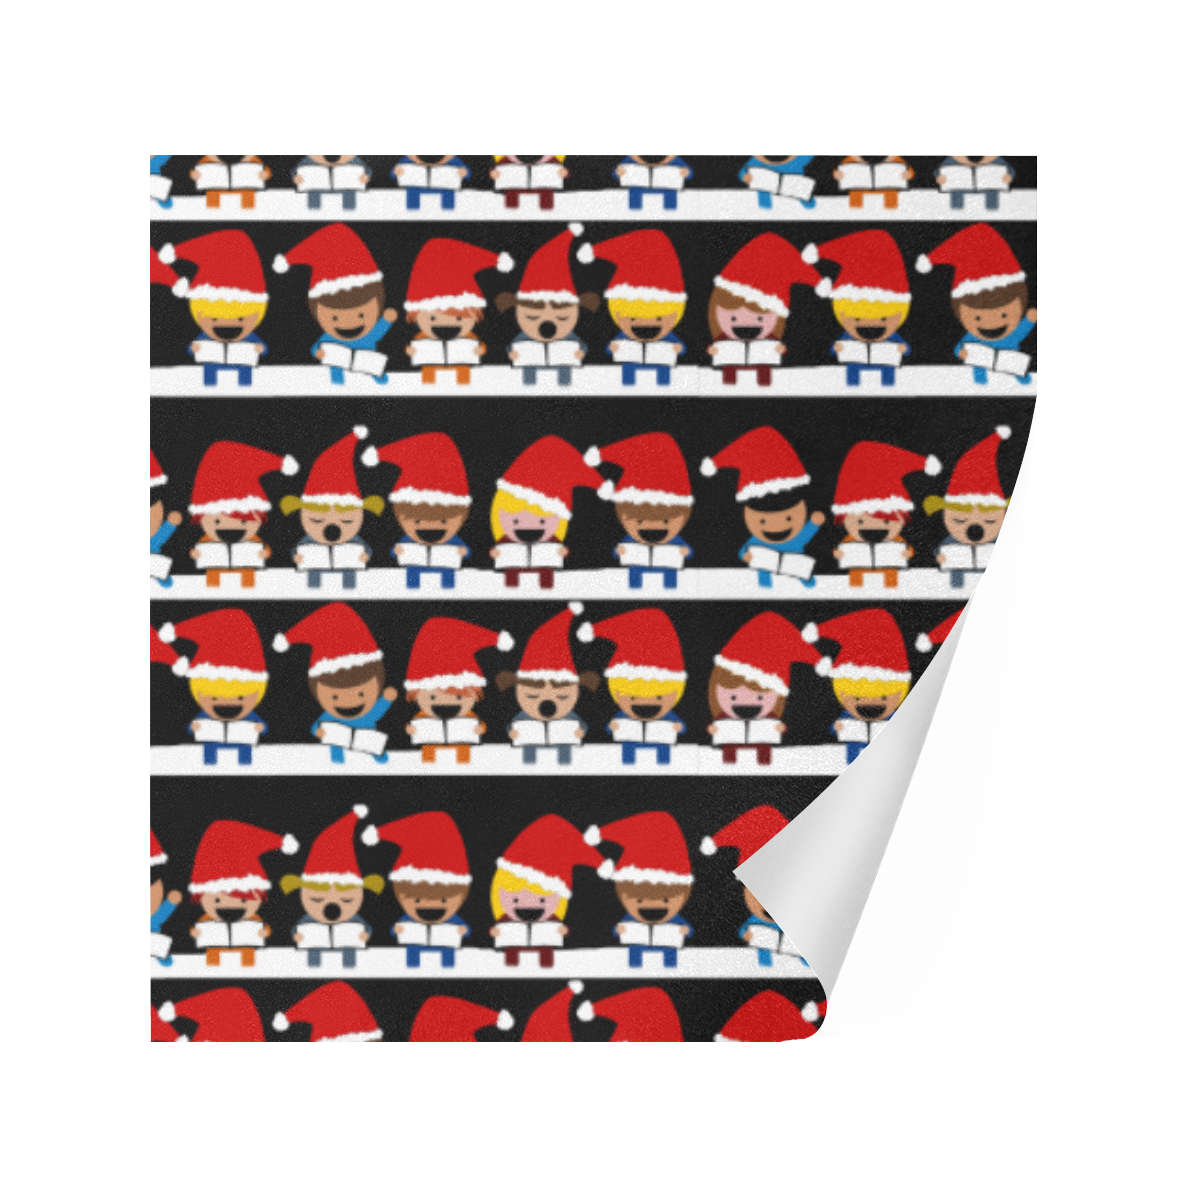 Christmas Carol Singers on Black Gift Wrapping Paper 58"x 23" (2 Rolls)